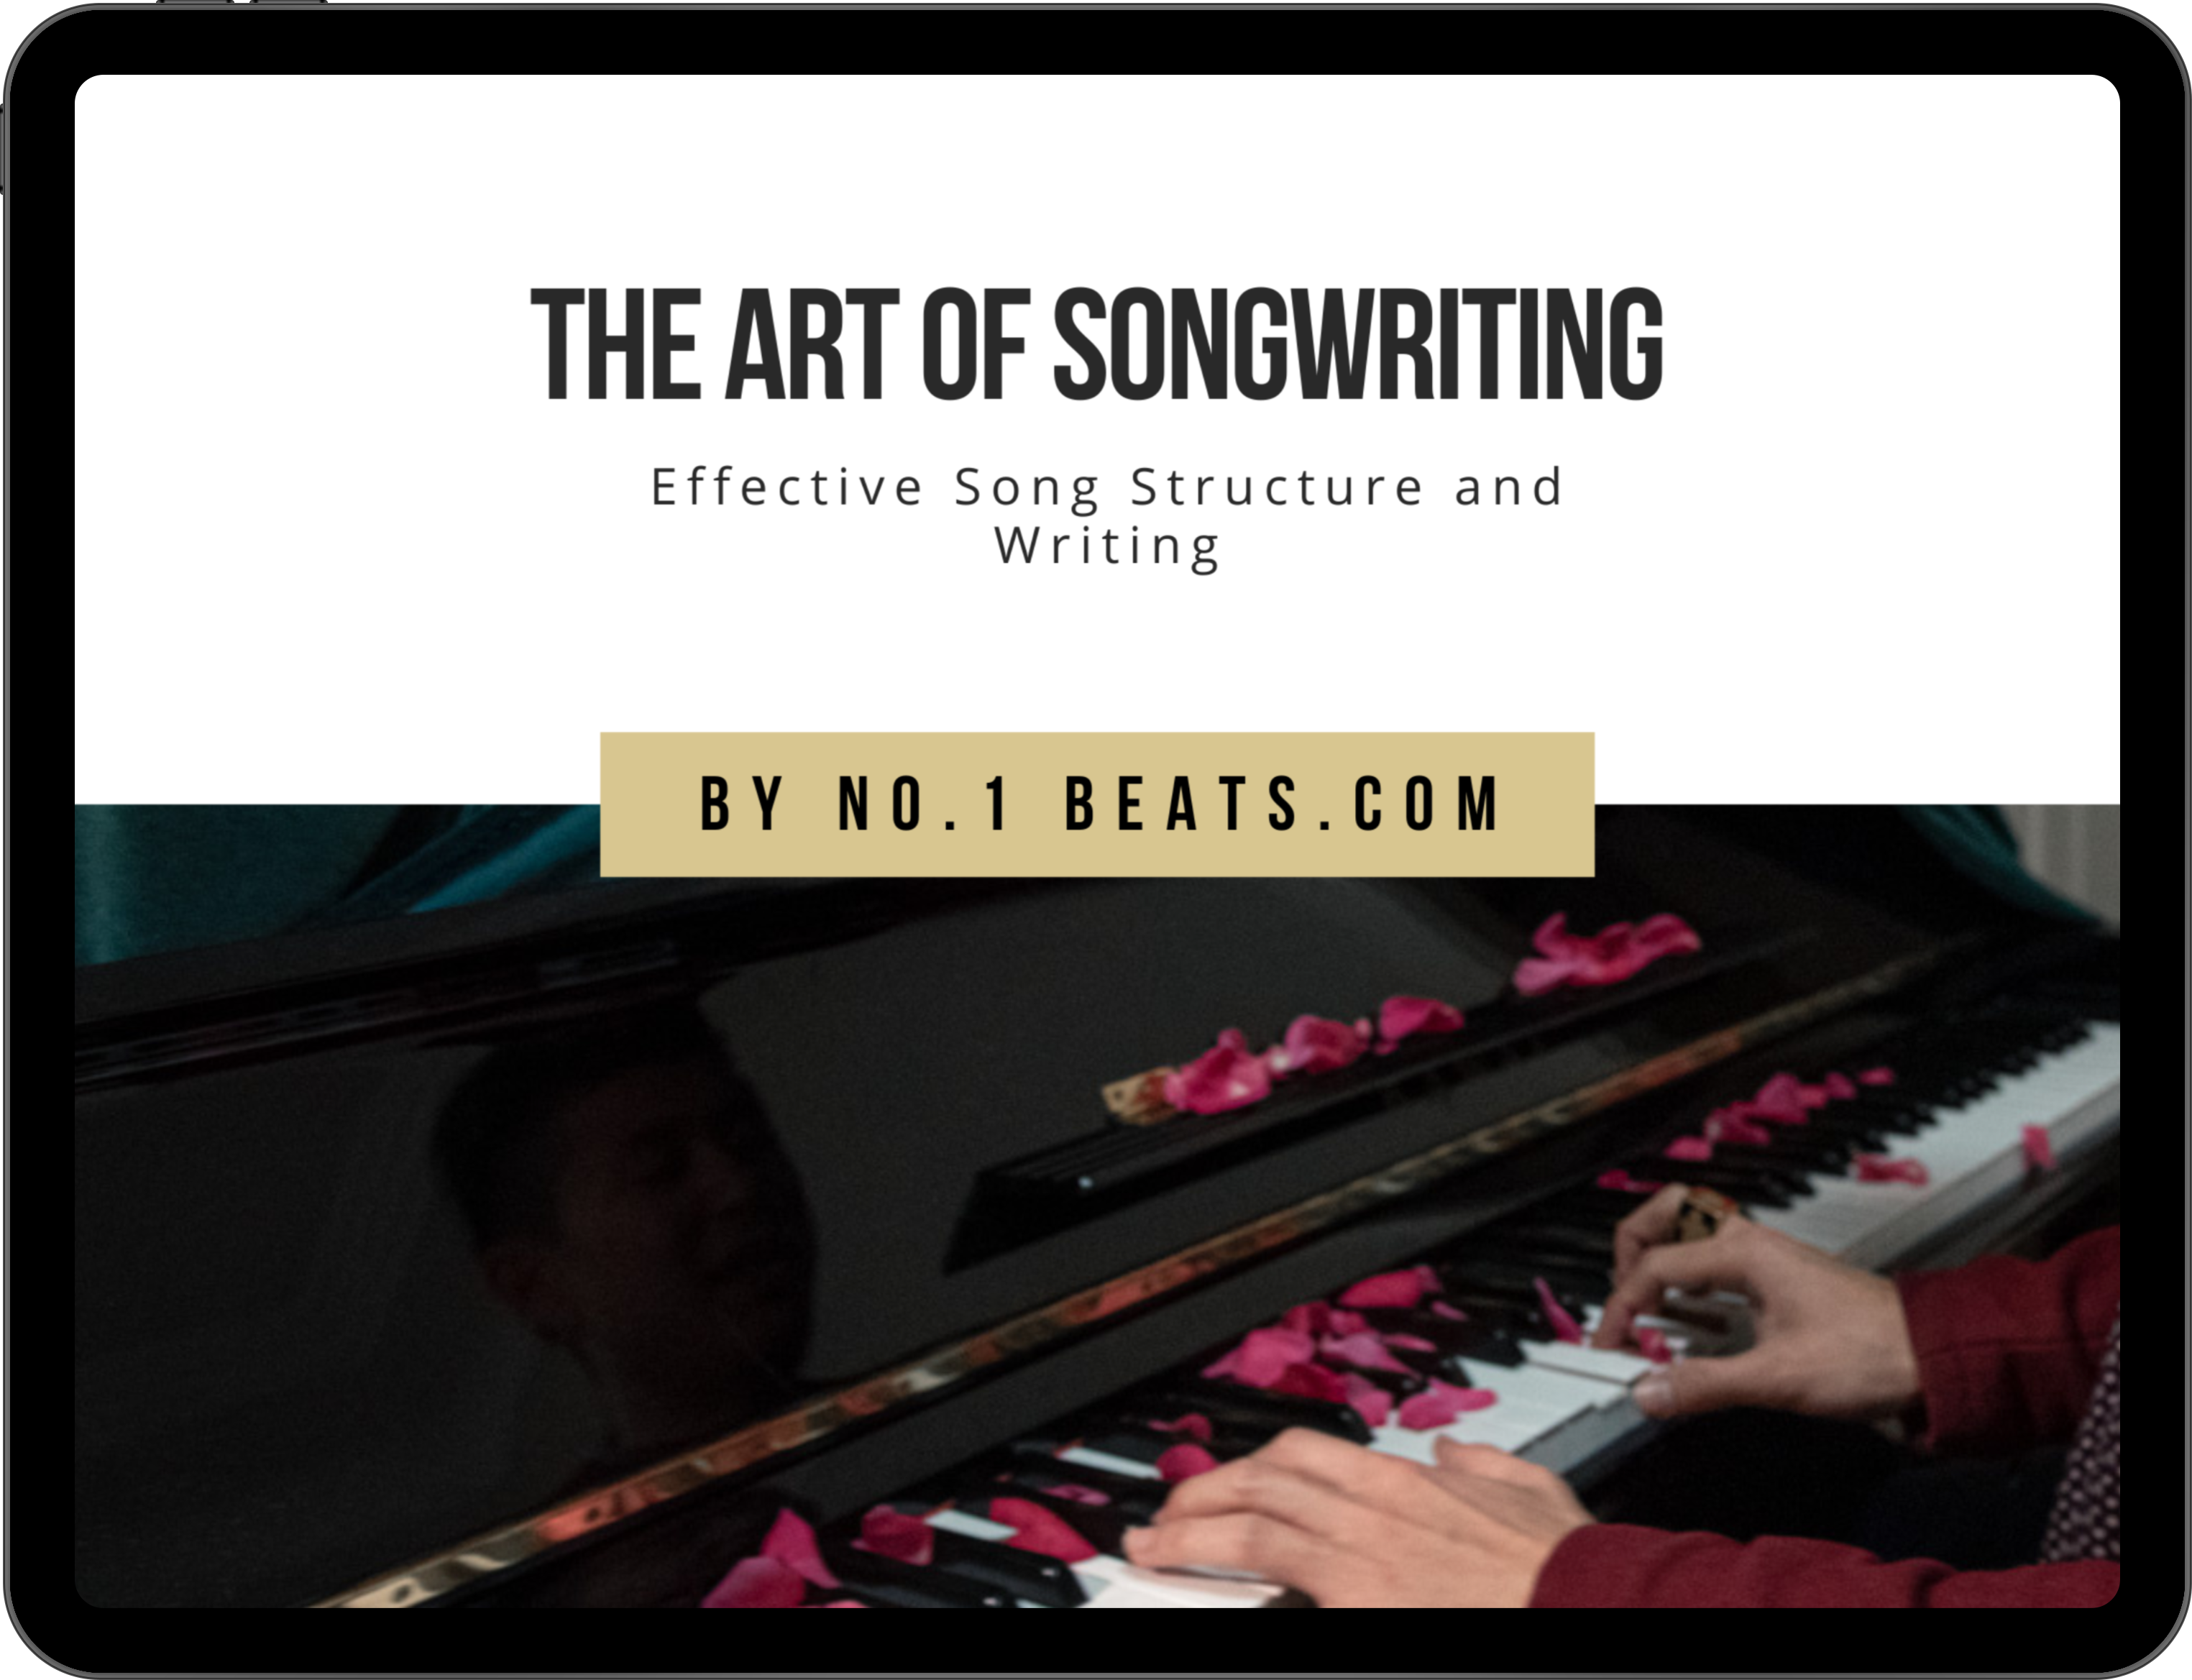 The Art of Songwriting and Song Arrangement